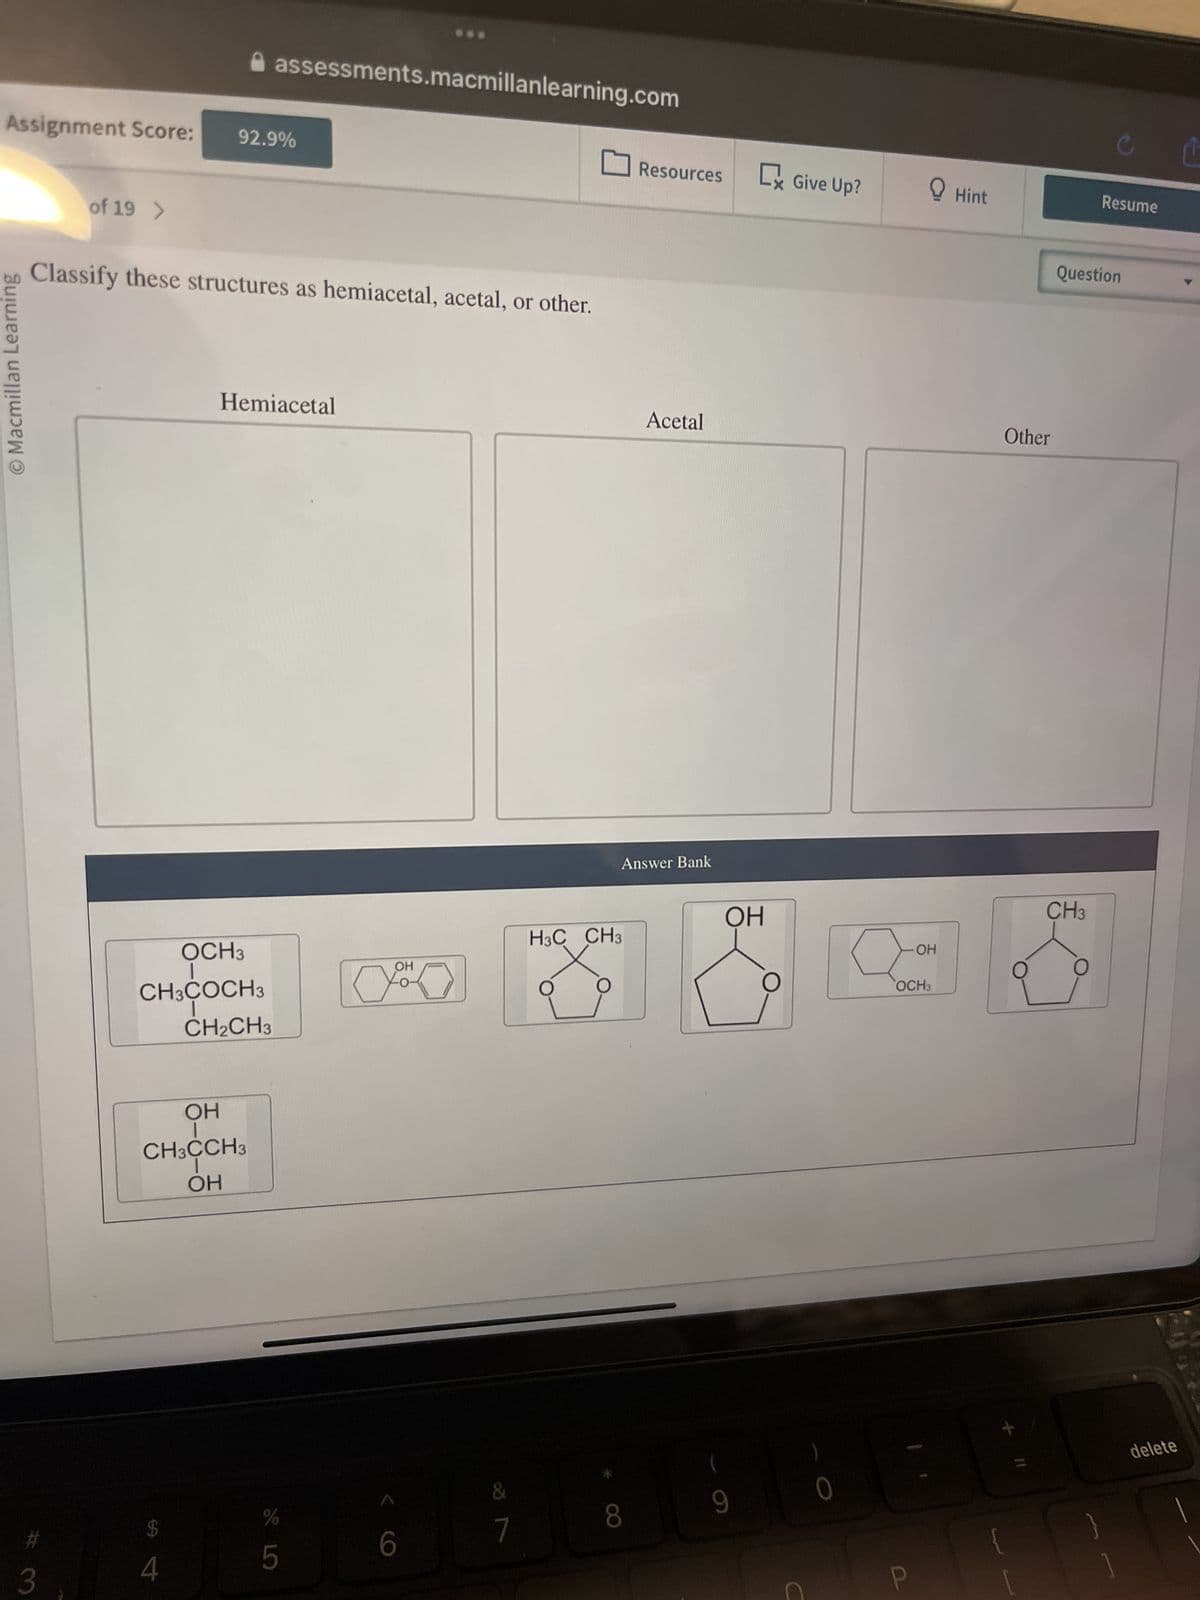 Assignment Score:
O Macmillan Learning
#
of 19 >
3
Classify these structures as hemiacetal, acetal, or other.
92.9%
assessments.macmillanlearning.com
OCH3
I
CH3COCH3
I
CH₂CH3
$
4
Hemiacetal
OH
CH3CCH3
T
OH
SLO
5
OH
6
&
7
H3C CH3
O
Resources C Give Up?
Answer Bank
8
Acetal
ОН
9
0
OH
OCH3
Hint
Other
Question
CH3
Resume
O
delete
Ľ